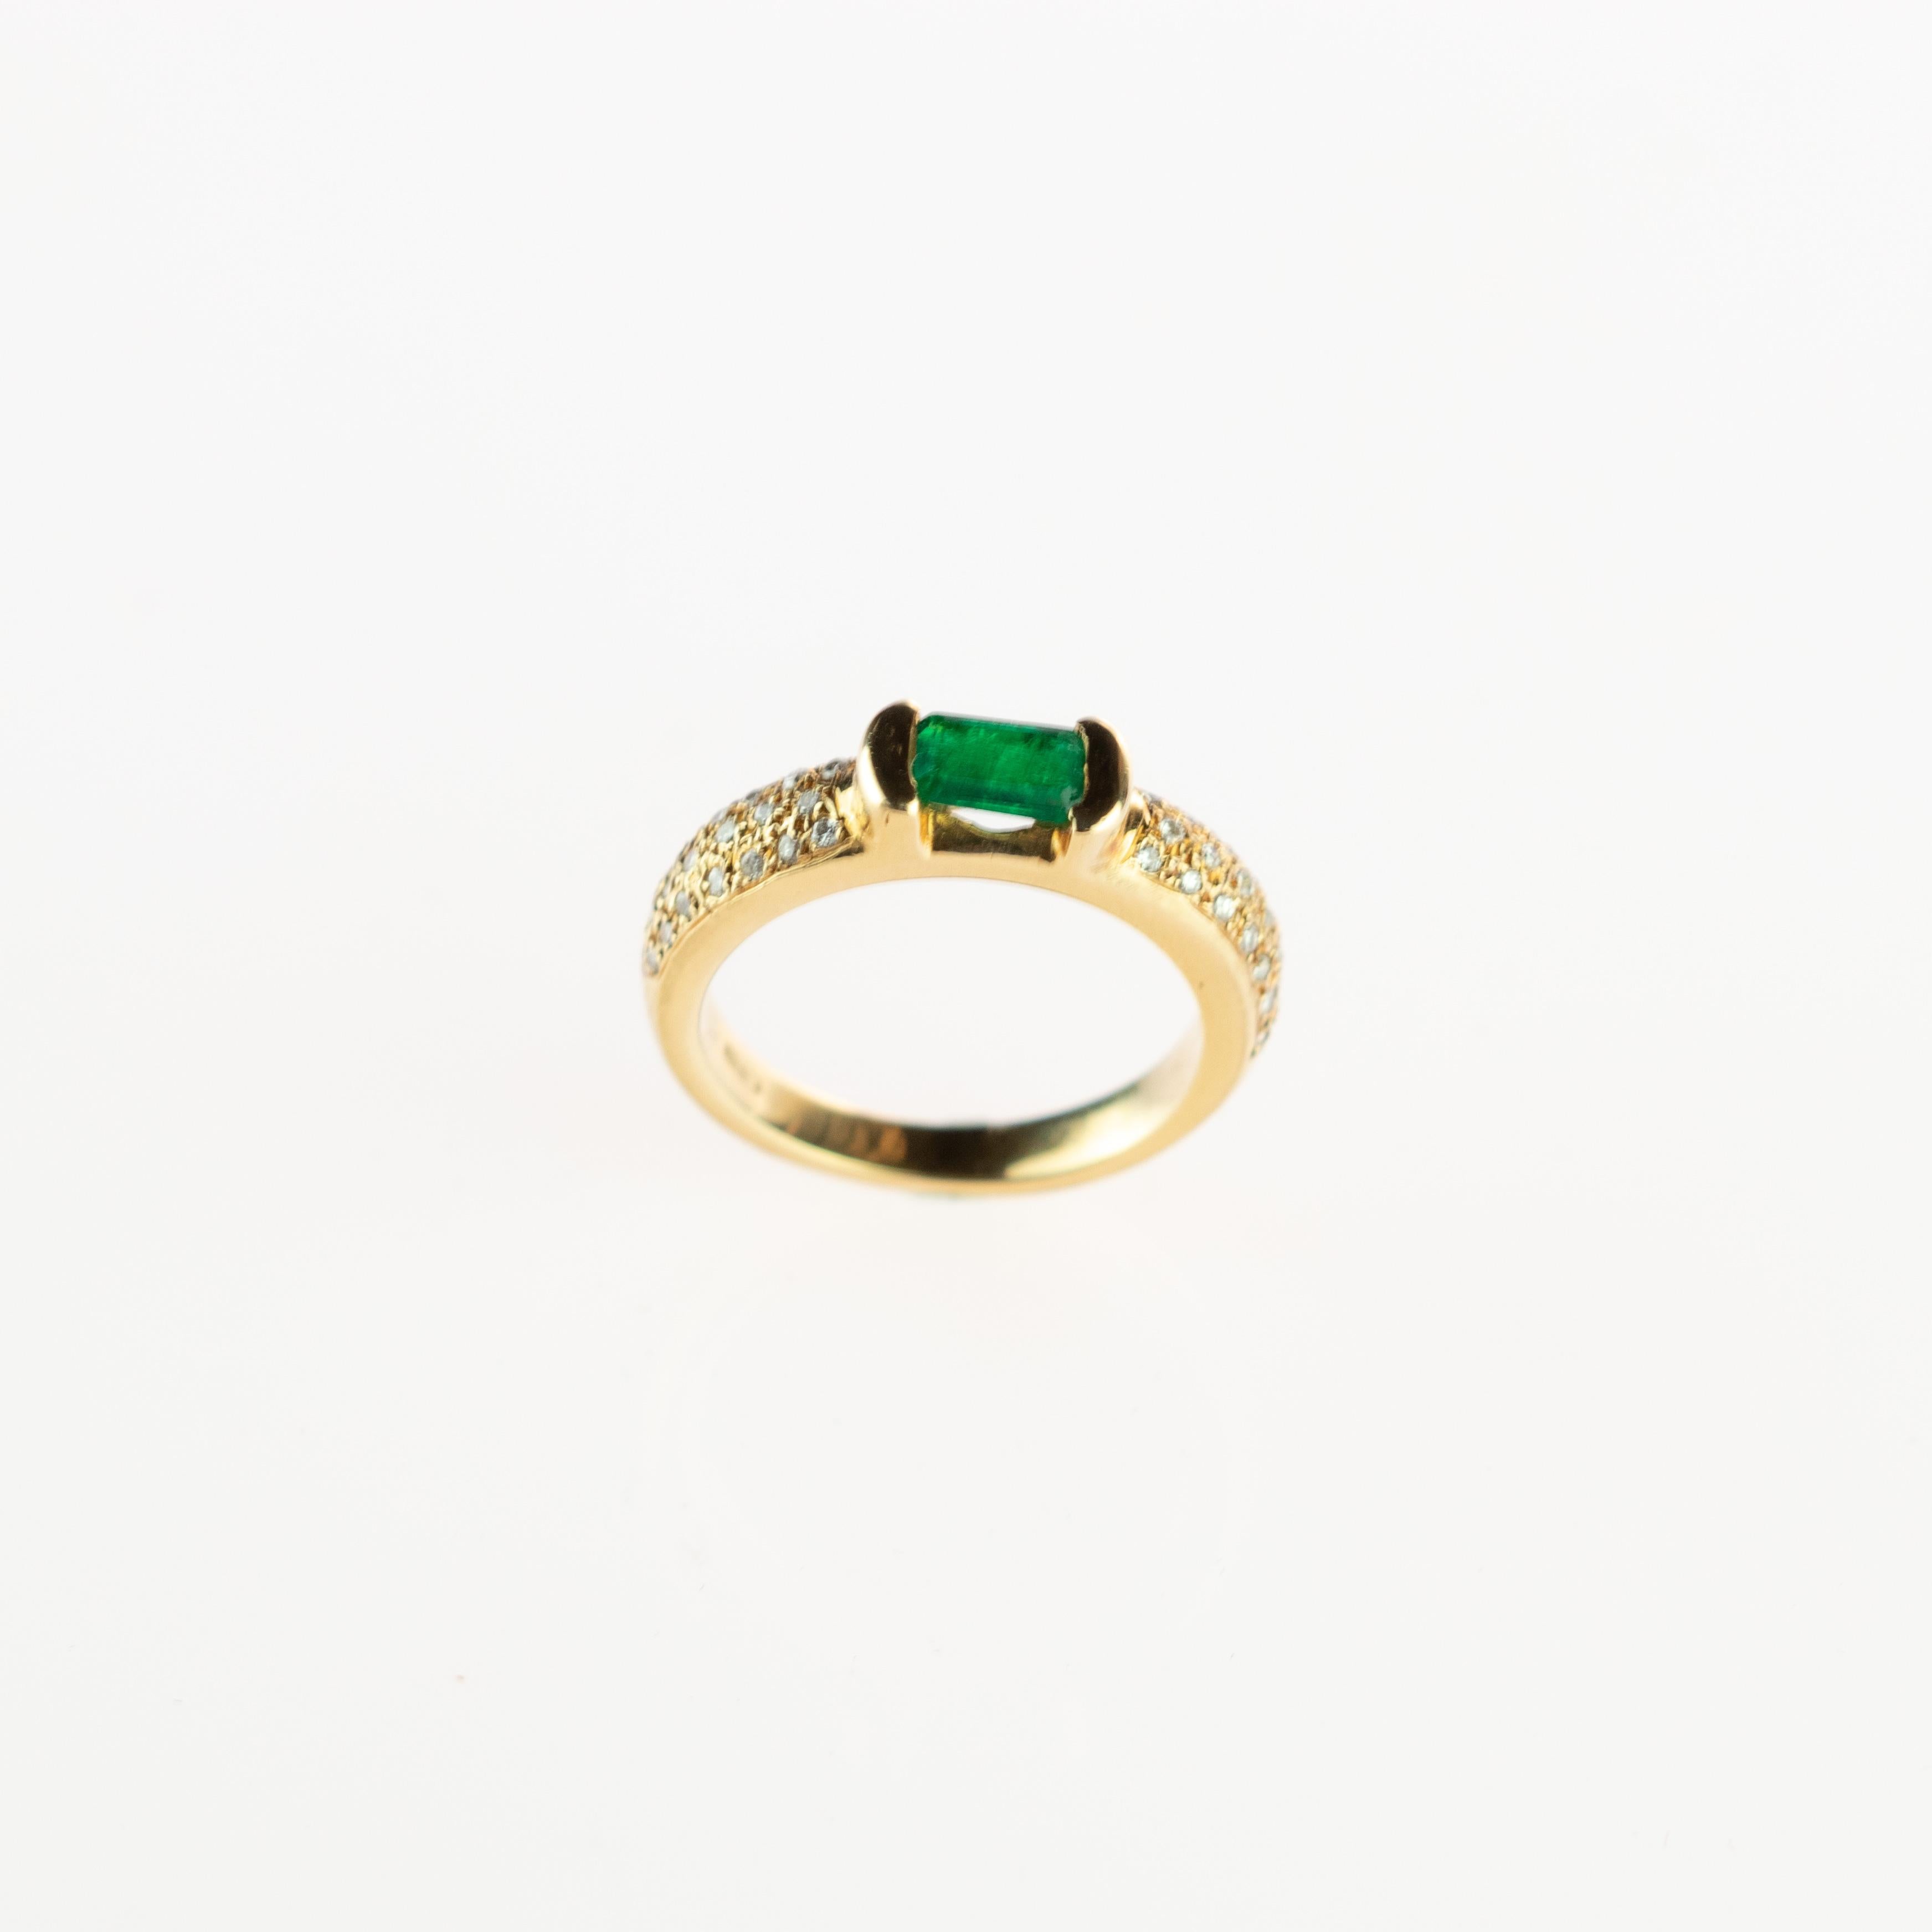 Amazing and stunning 0.52 carat emerald stone with a brilliant cut that is surrounded by 18 karat yellow gold. Embellished by numerous diamonds that create an elegant cocktail jewel piece enhanced by a solitaire look in a unique way. 
 
This ring is